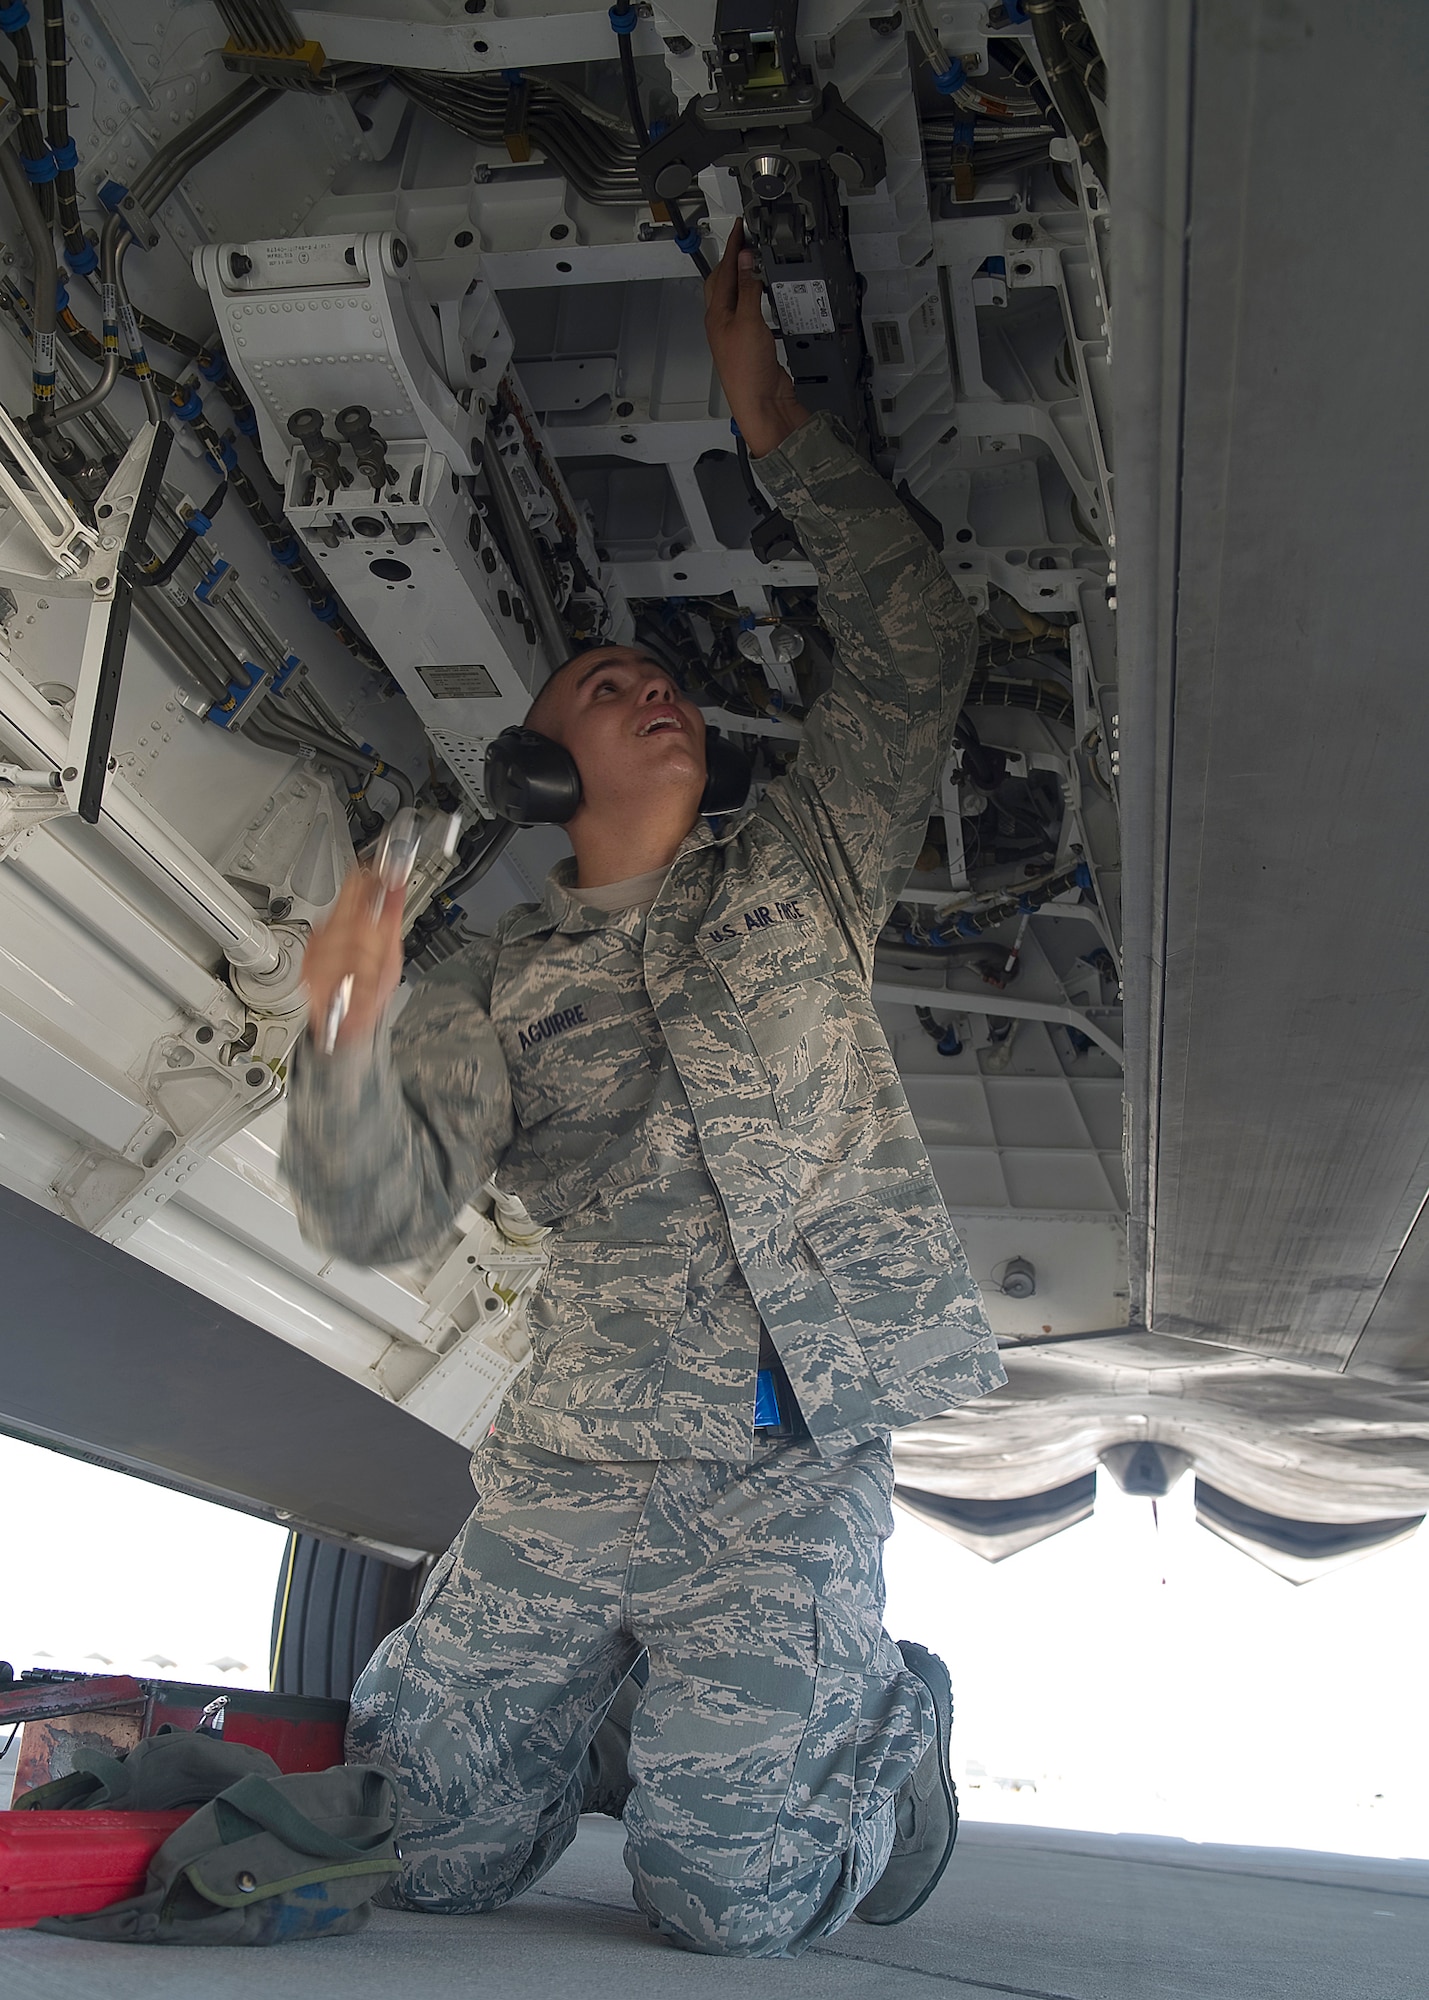 HOLLOMAN AIR FORCE BASE, N.M. -- Airman 1st Class Eric Aguirre, 49th Aircraft Maintenance Squadron, prepares to ratchet a bolt under an F-22 Raptor in preparation to load a GBU-32 bomb during a load crew competition July 8, 2011, outside of Hangar 301. Aguirre’s crew loaded a GBU-32 and an AIM-9 sidewinder during the competition. This particular competition marked the first time a German Air Force load crew participated with the 49th Maintenance Squadron’s crews.  (U.S. Air Force photo by Senior Airman John D. Strong II/Released)